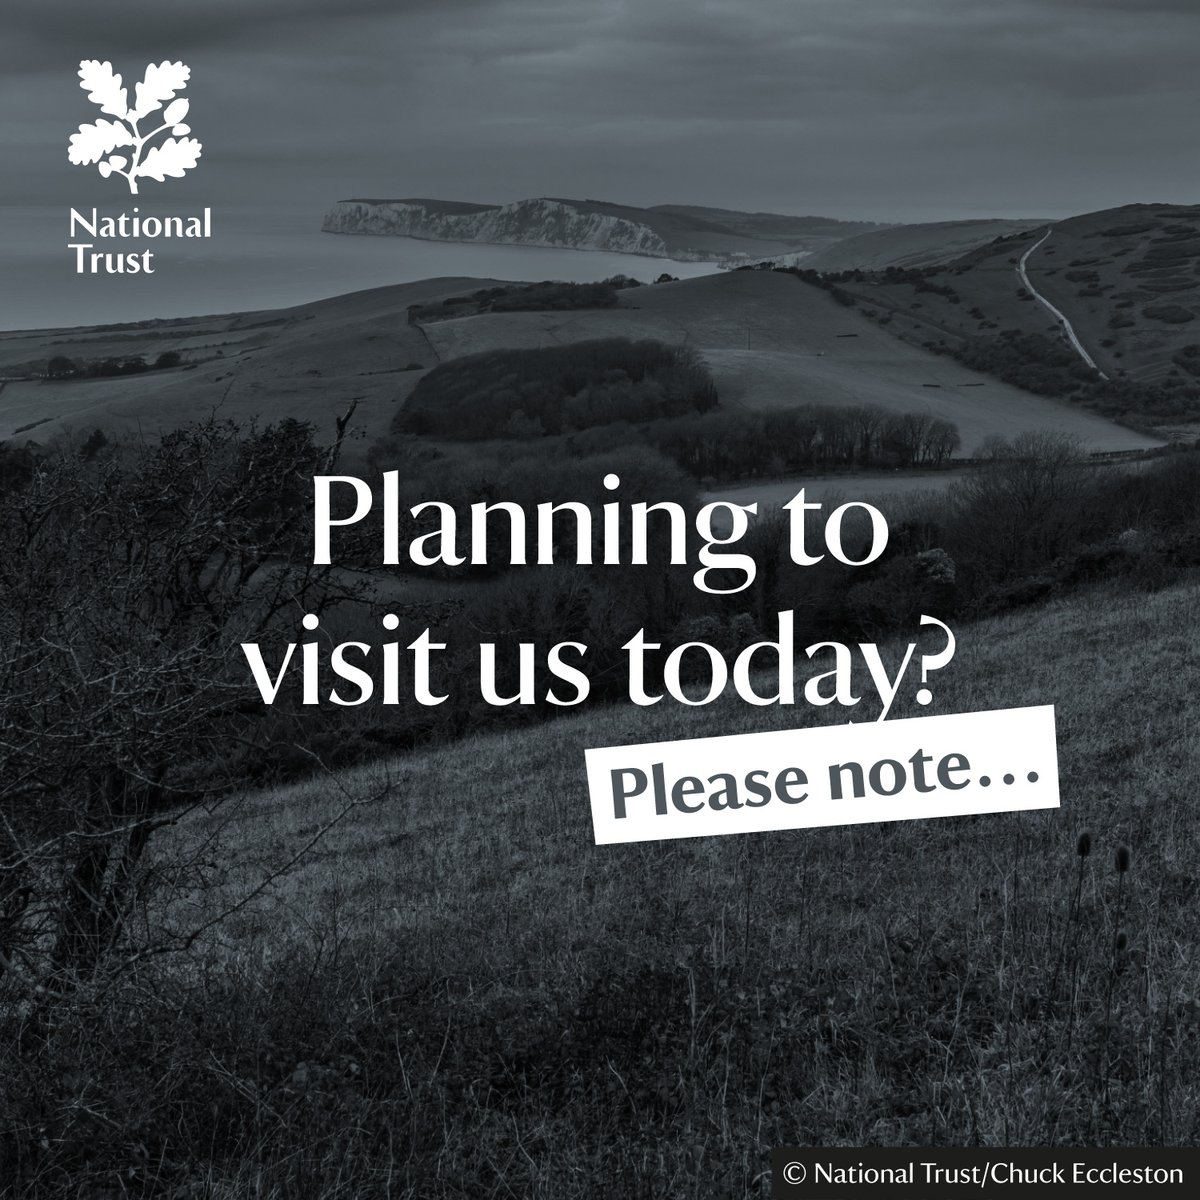 Just a reminder that the Needles Battery, Mottistone Gardens, Newtown Visitor Point & Bembridge Windmill are closed today as a mark of respect & to allow staff & volunteers to attend the funeral of our Head Gardener. We're sorry for any inconvenience. Thank you for understanding.